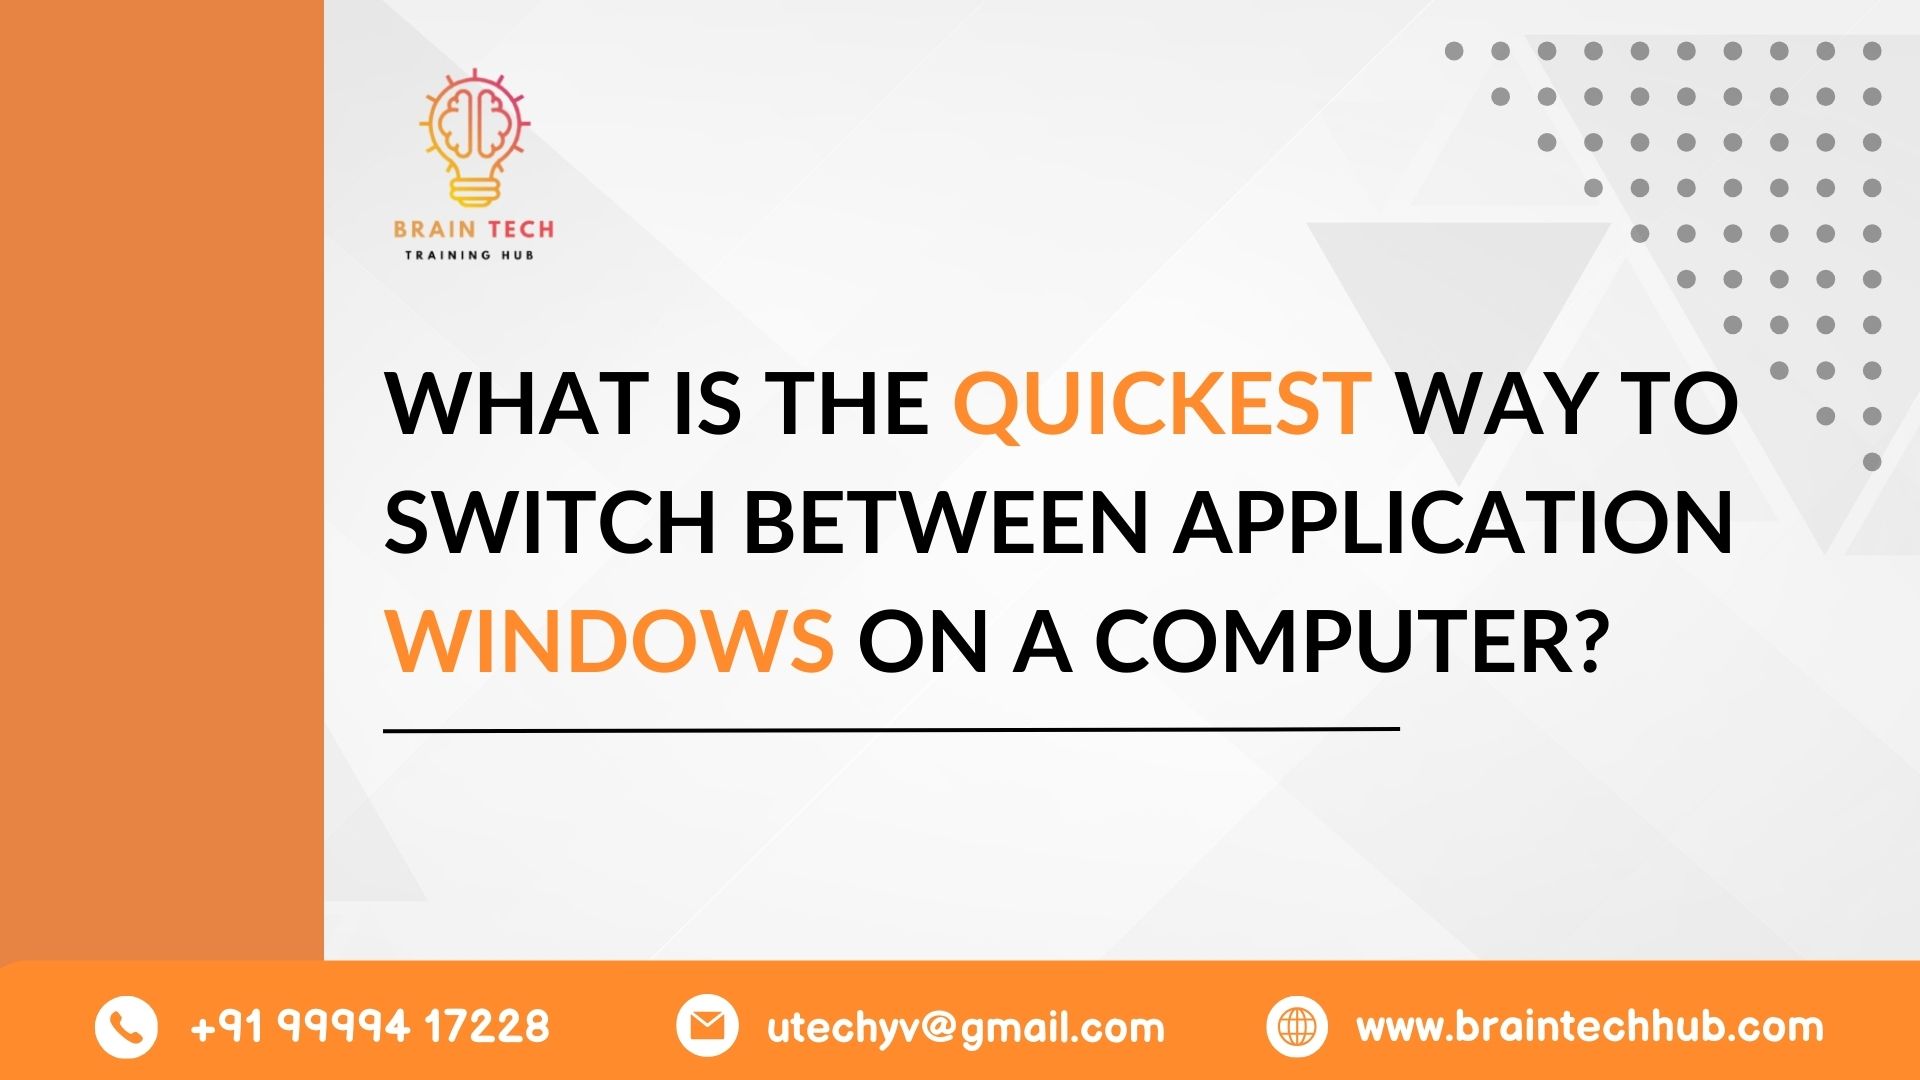 What is the quickest way to switch between application windows on a computer